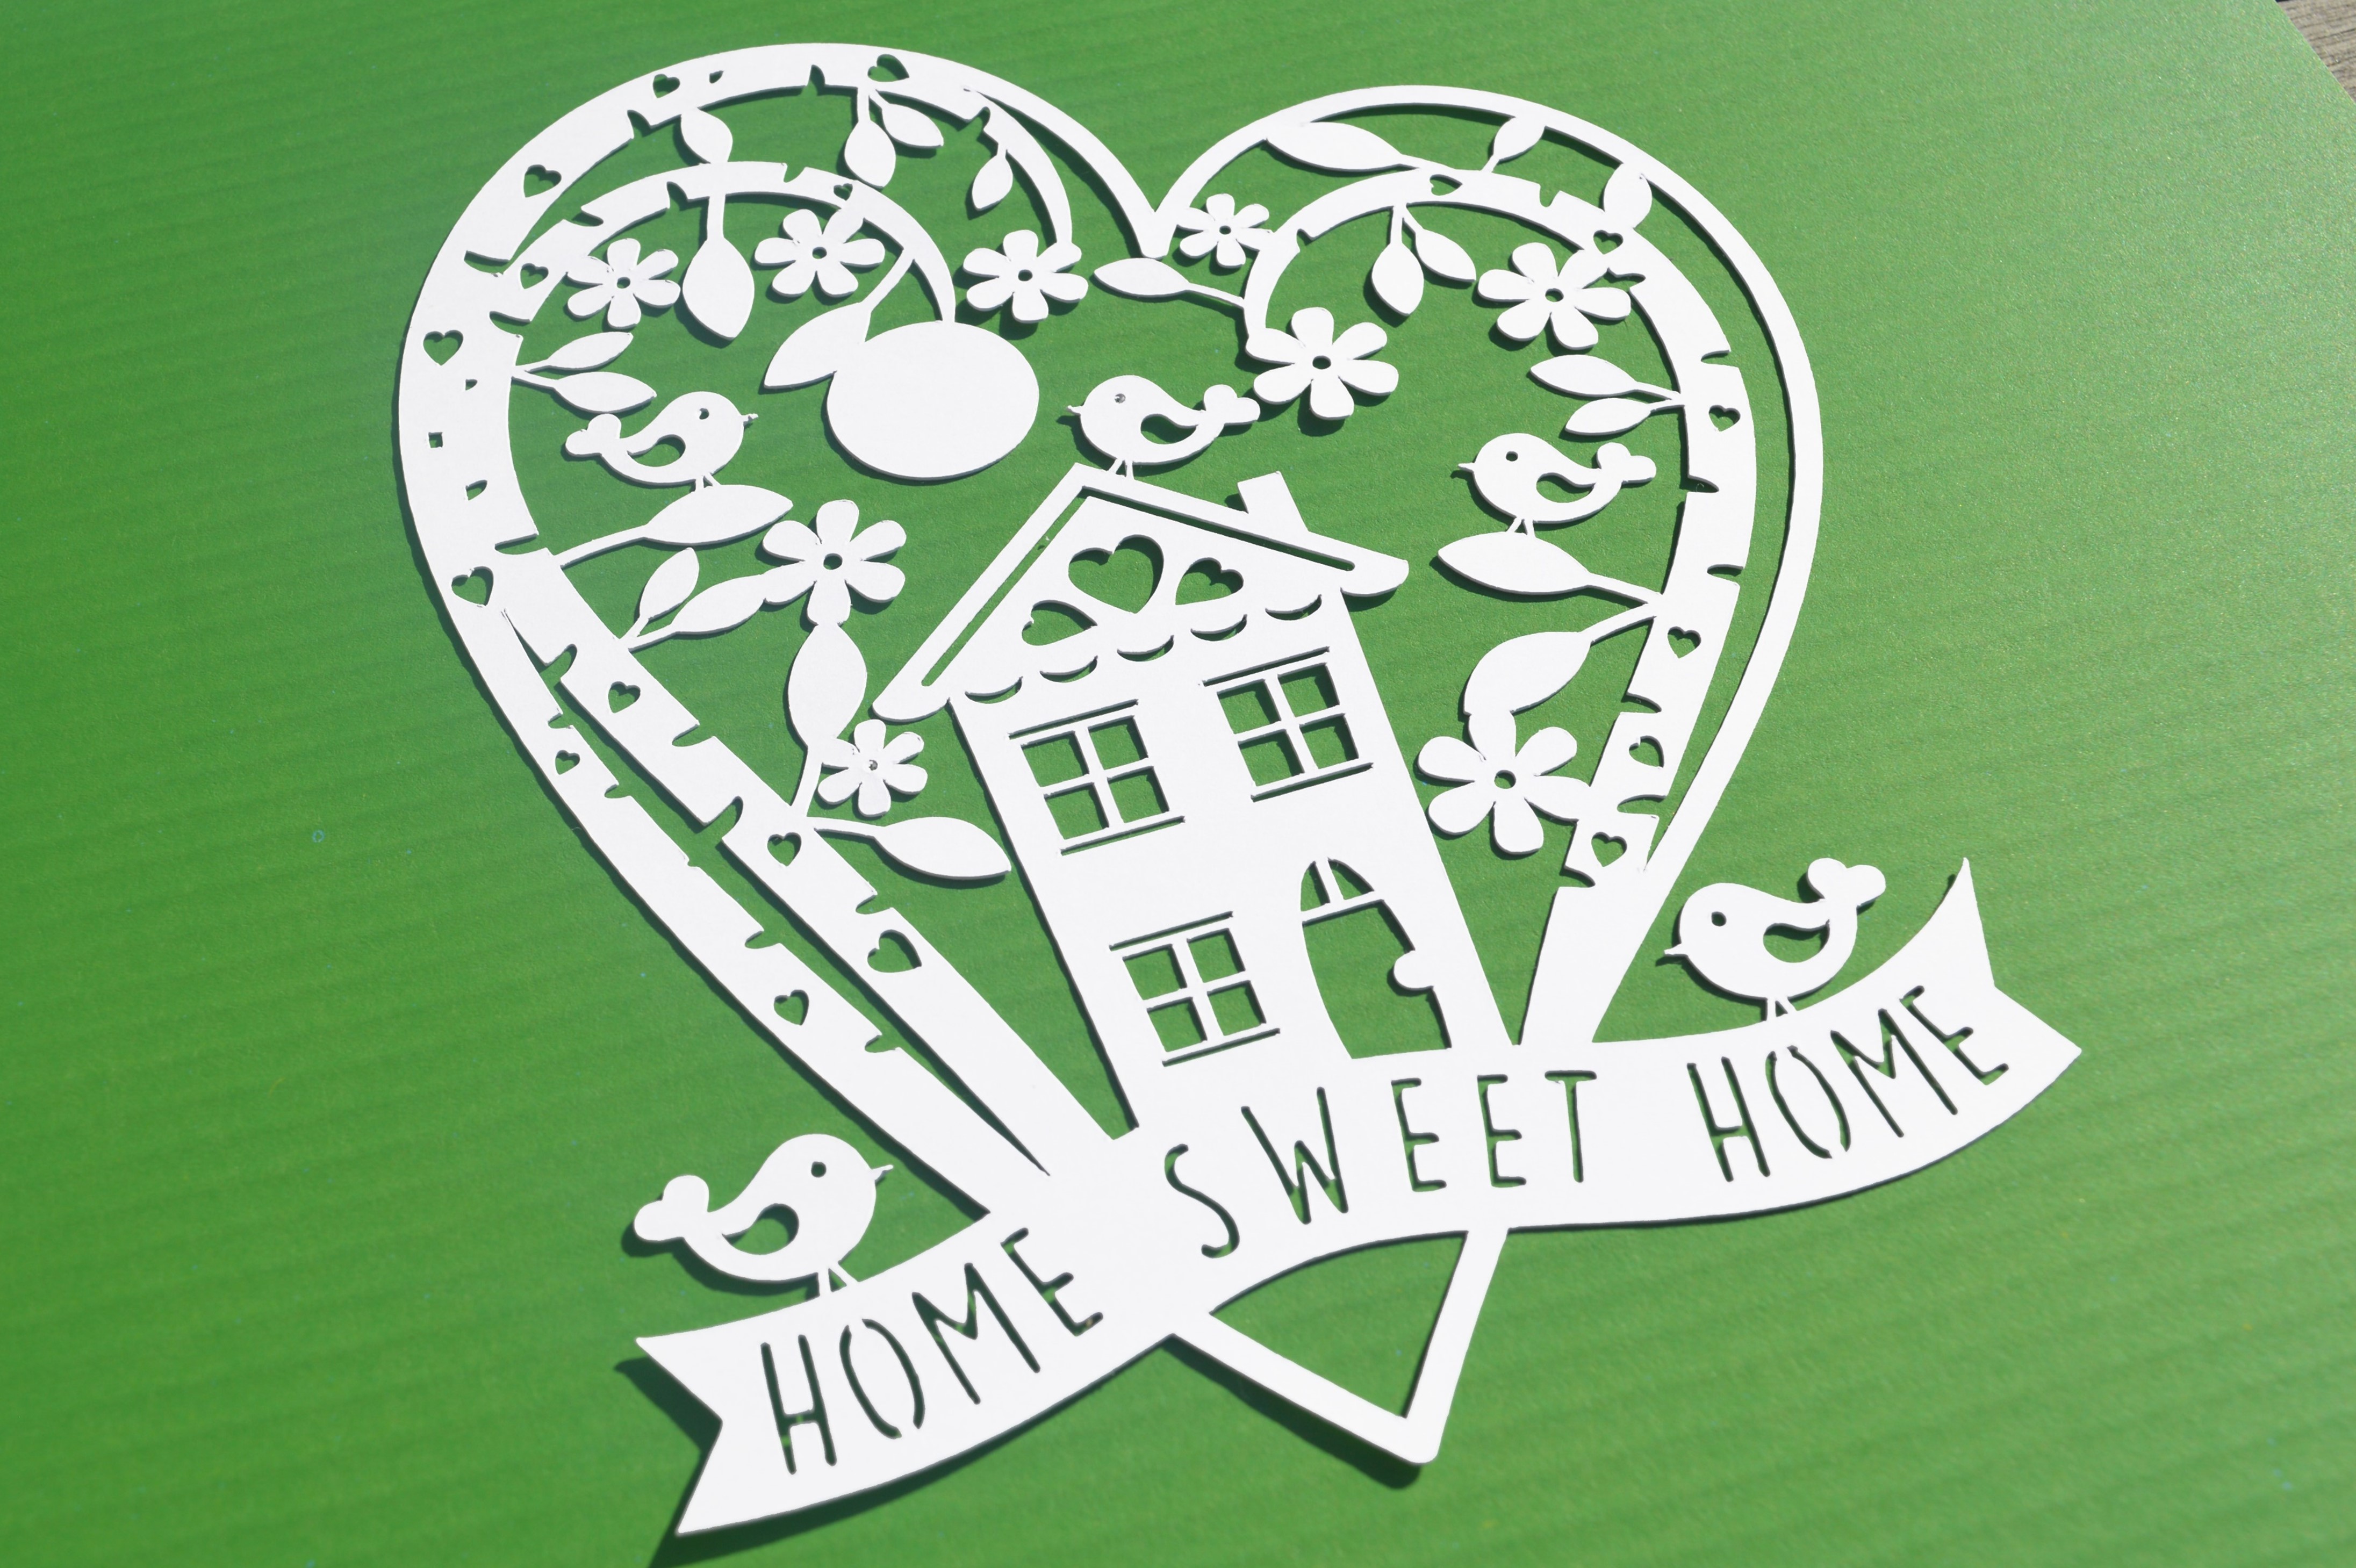 Download New home paper cut SVG / DXF / EPS files